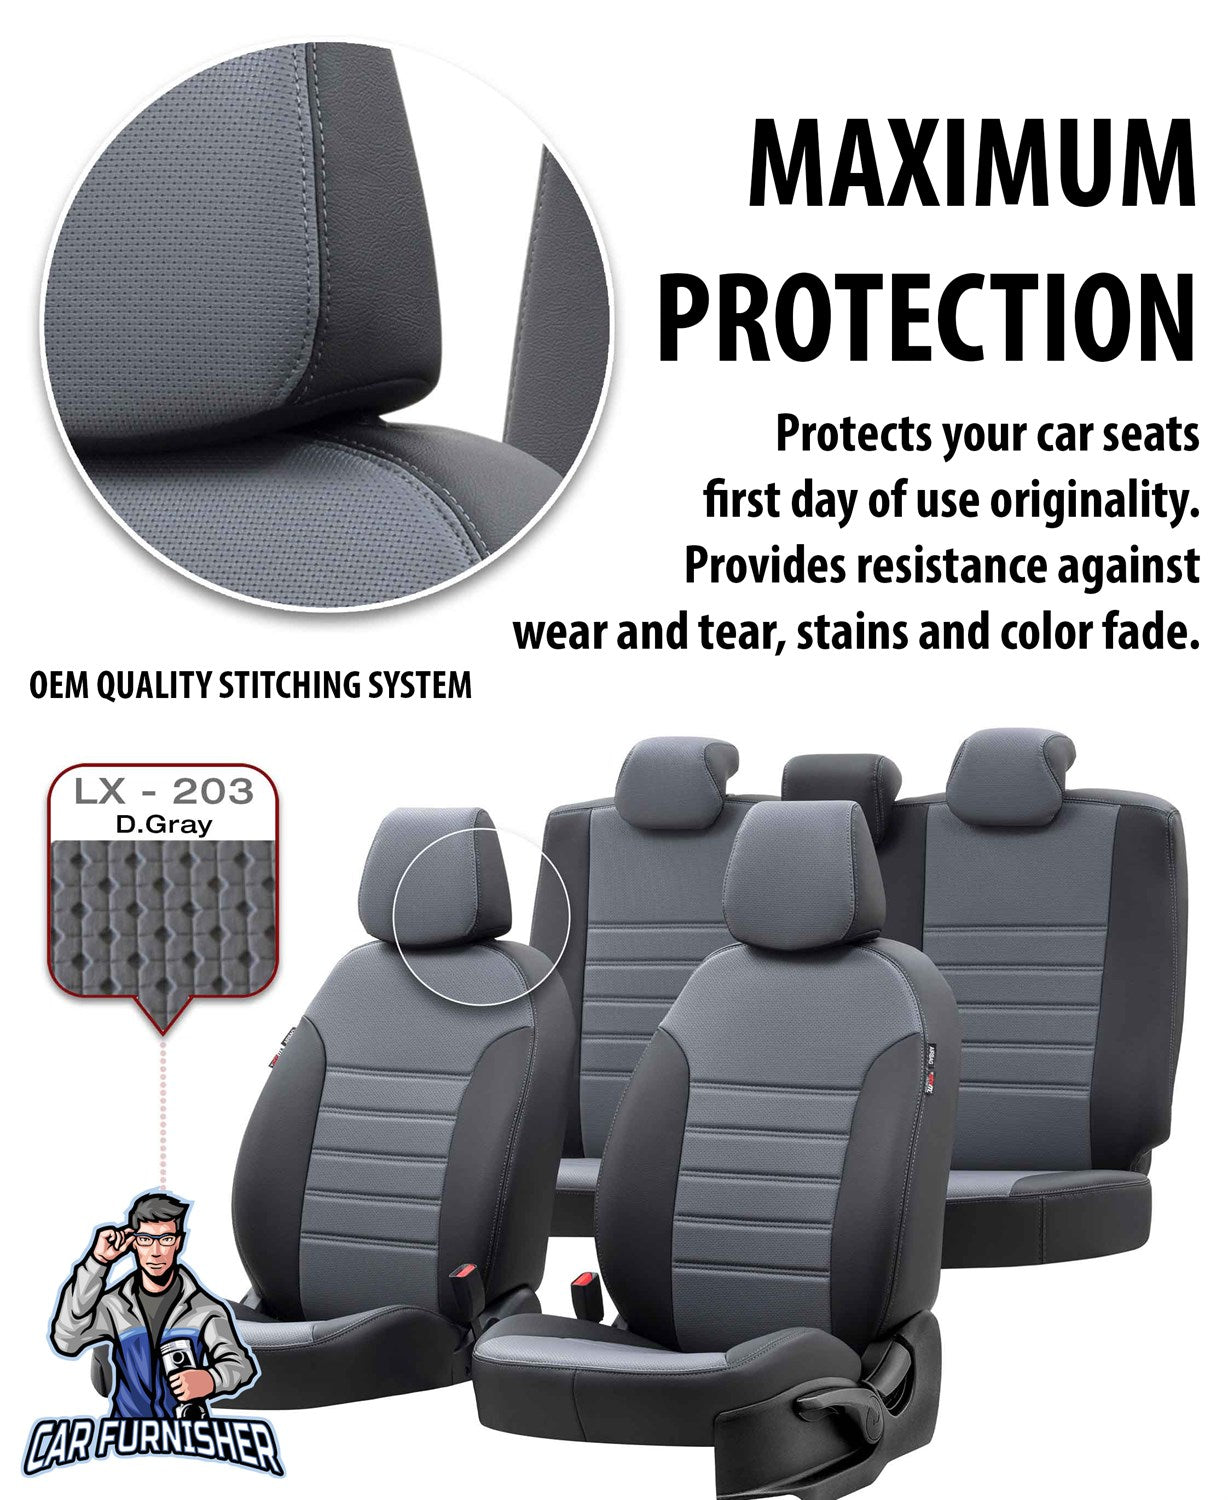 Volkswagen Caddy Seat Cover New York Leather Design Smoked Black Leather